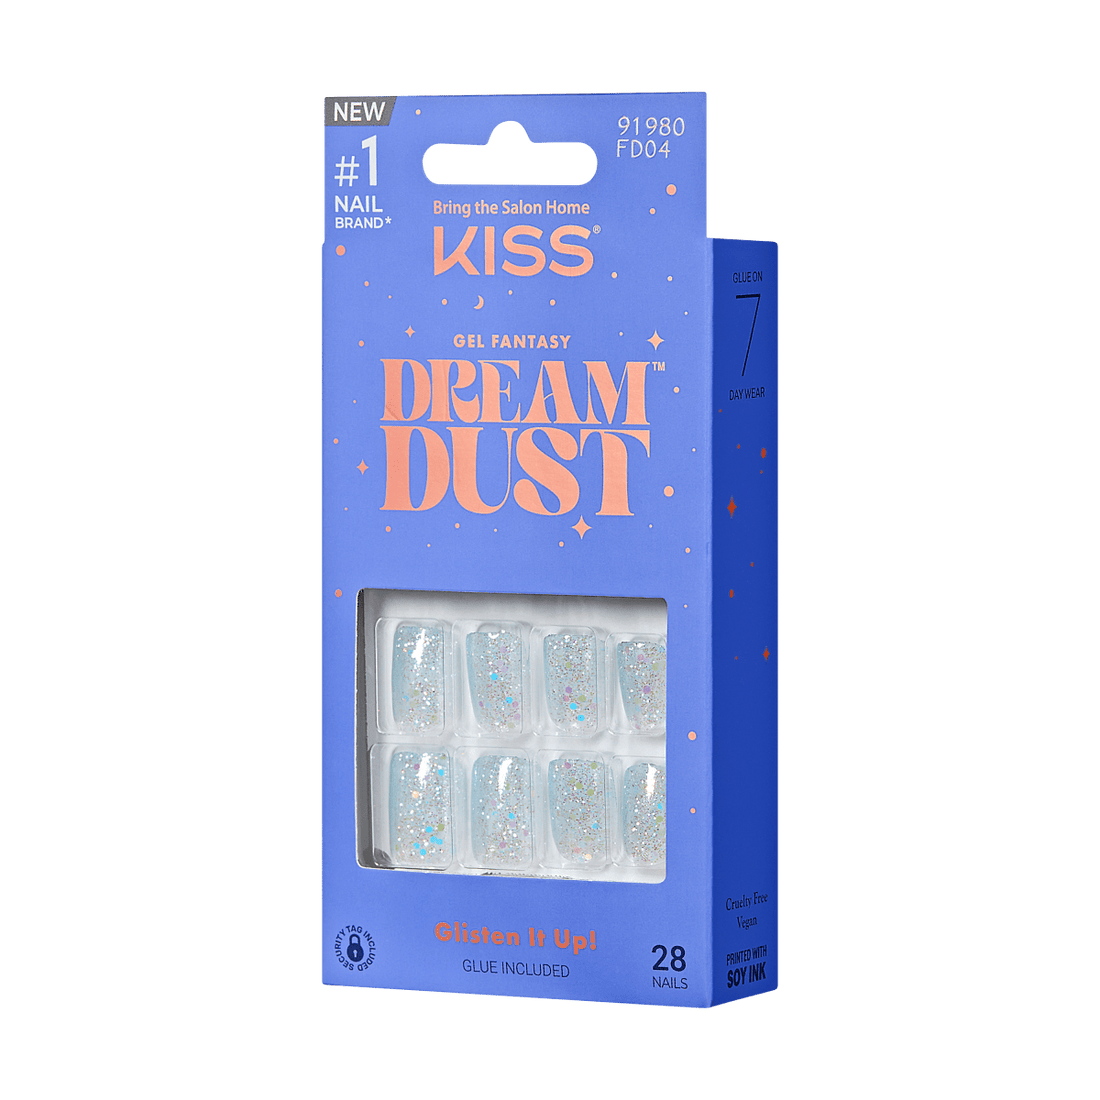 KISS Gel Fantasy Dreamdust, Press-On Nails, Champagnes, Blue, Short Squoval, 28ct